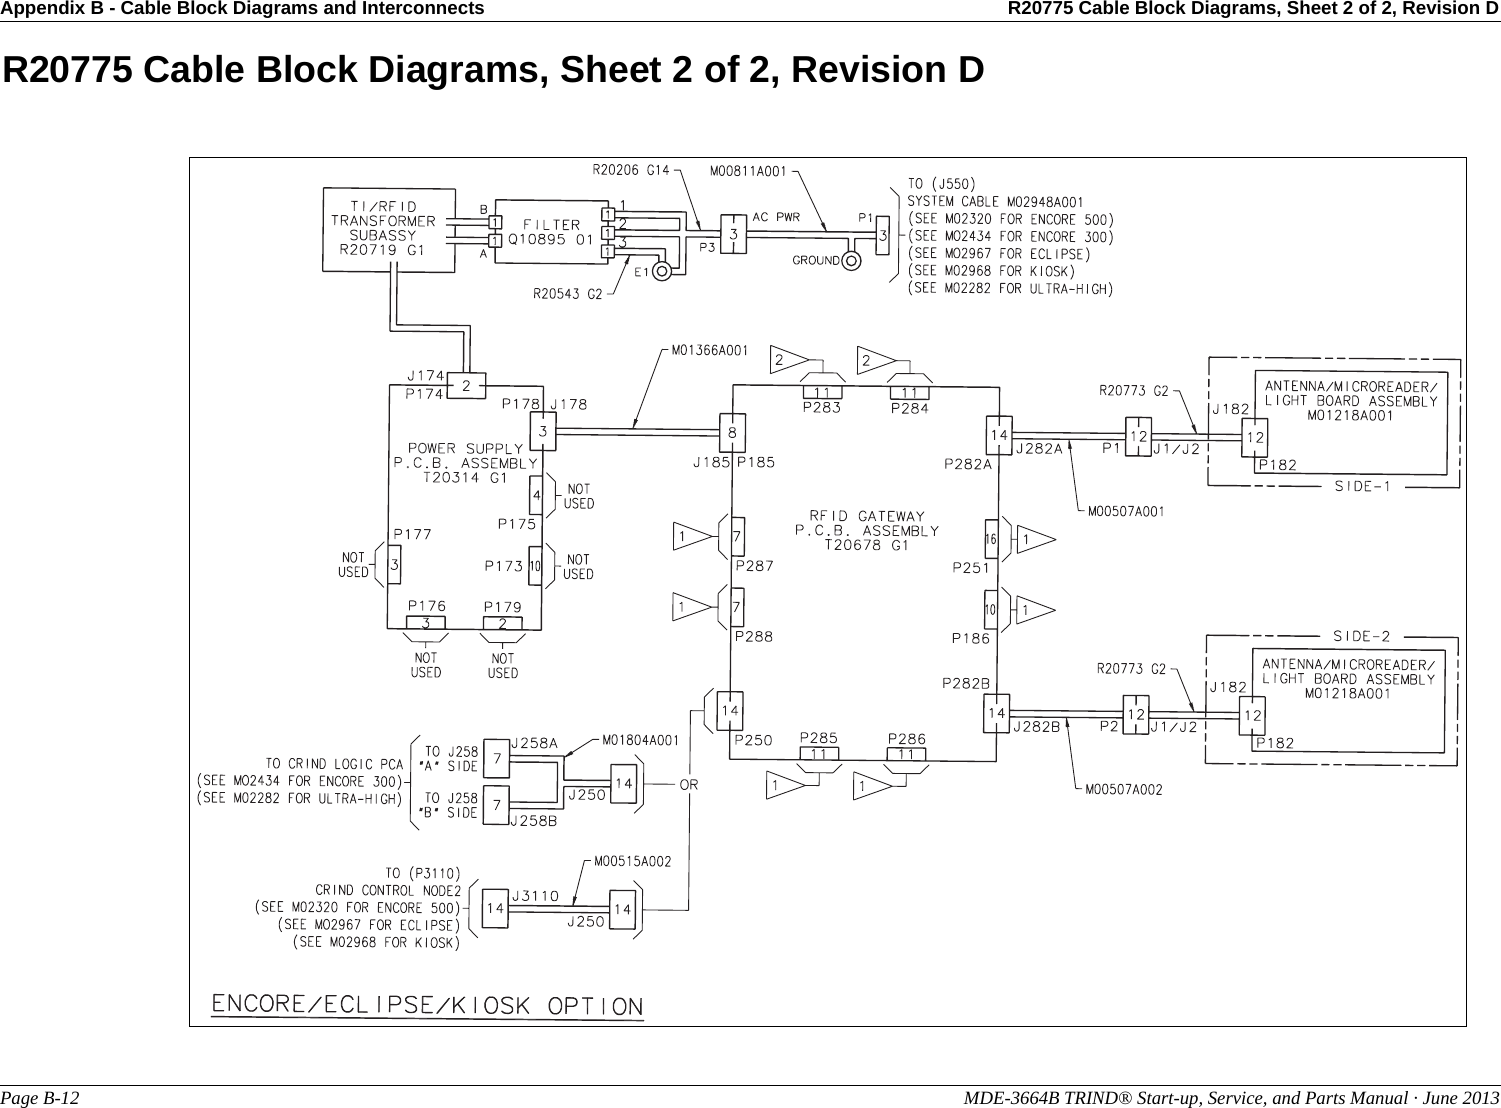 Appendix B - Cable Block Diagrams and Interconnects R20775 Cable Block Diagrams, Sheet 2 of 2, Revision DPage B-12                                                                                                               MDE-3664B TRIND® Start-up, Service, and Parts Manual · June 2013R20775 Cable Block Diagrams, Sheet 2 of 2, Revision D